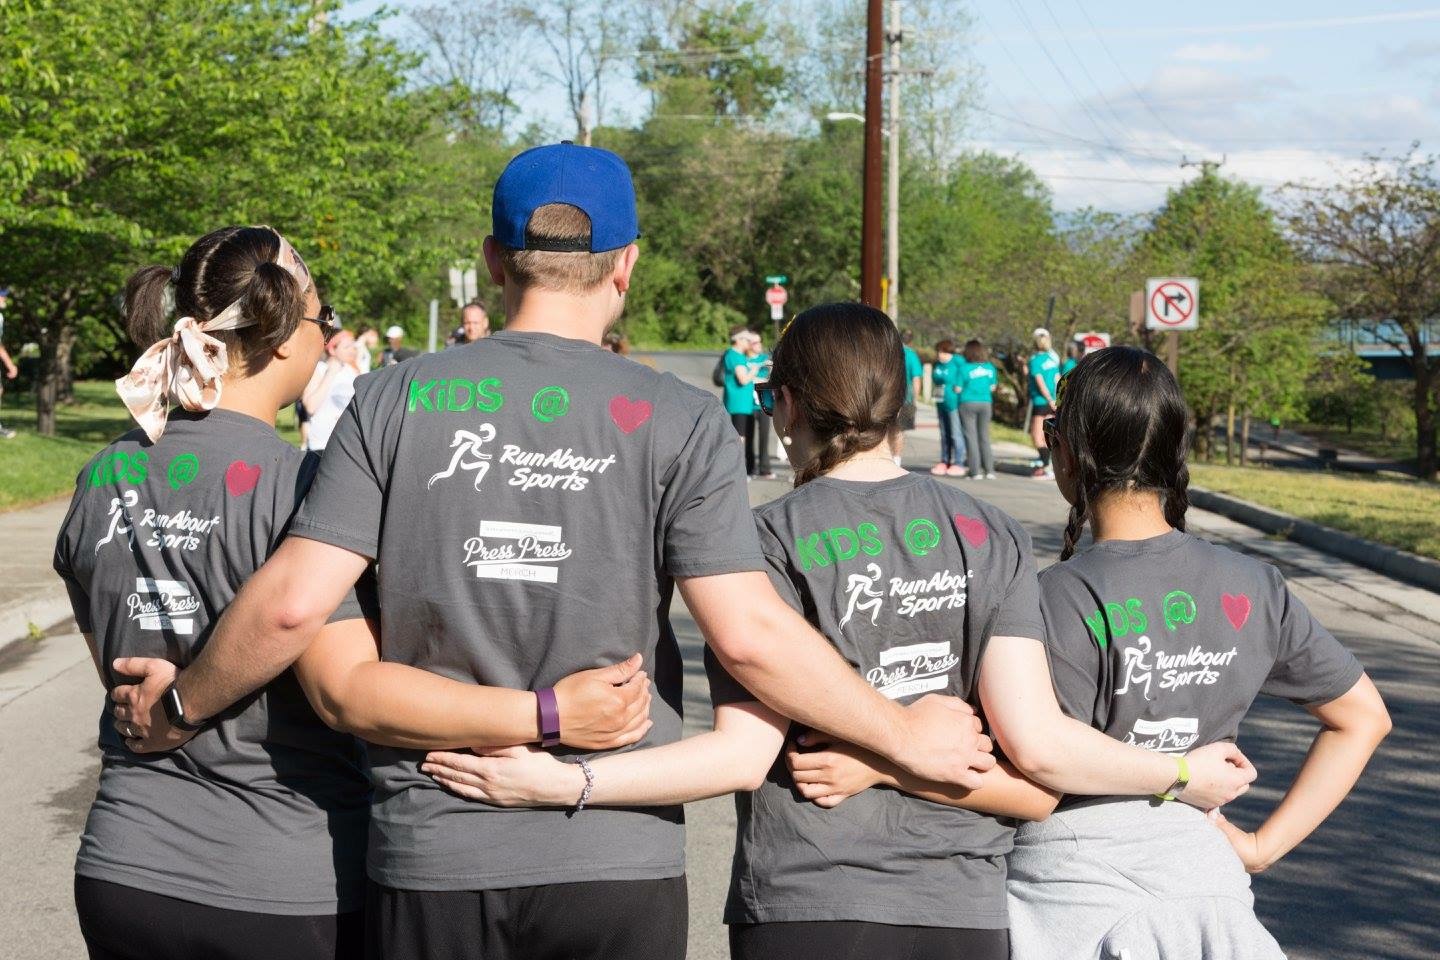 Pediatric residents picture of resident's t-shirt back for relay race